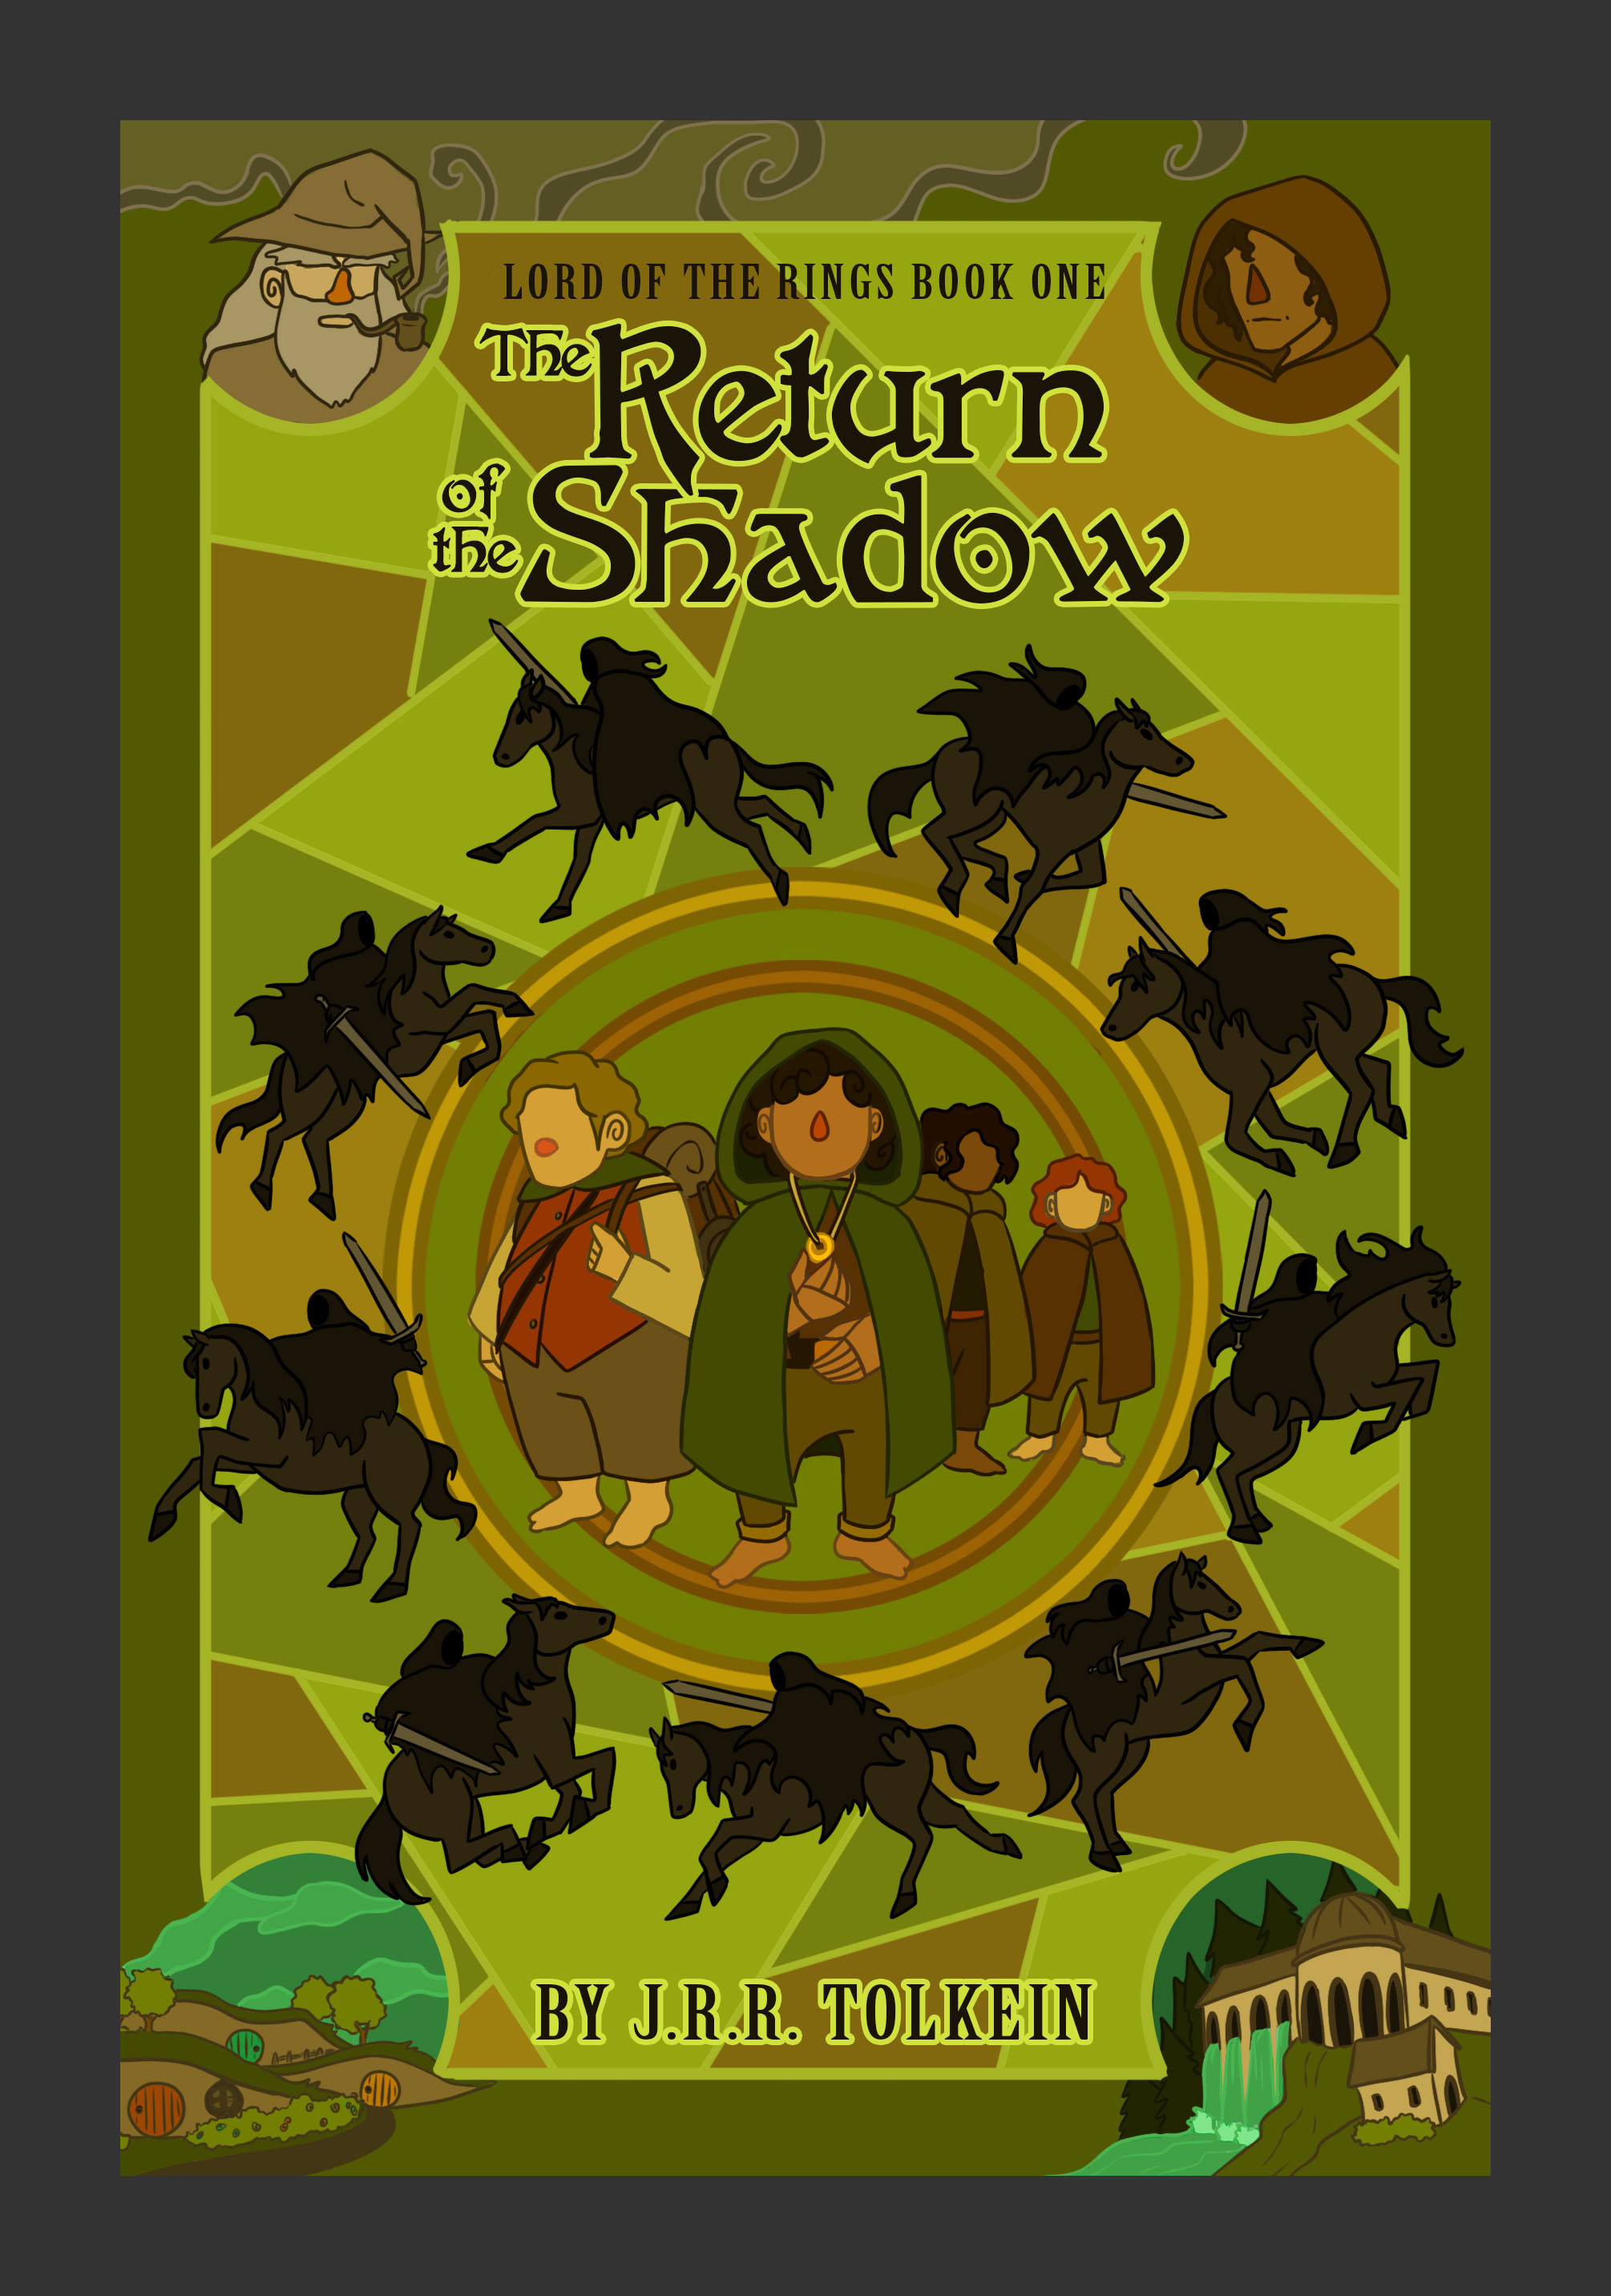 Cover for book one: The Return of the Shadow (first half of The Fellowship of the Ring)